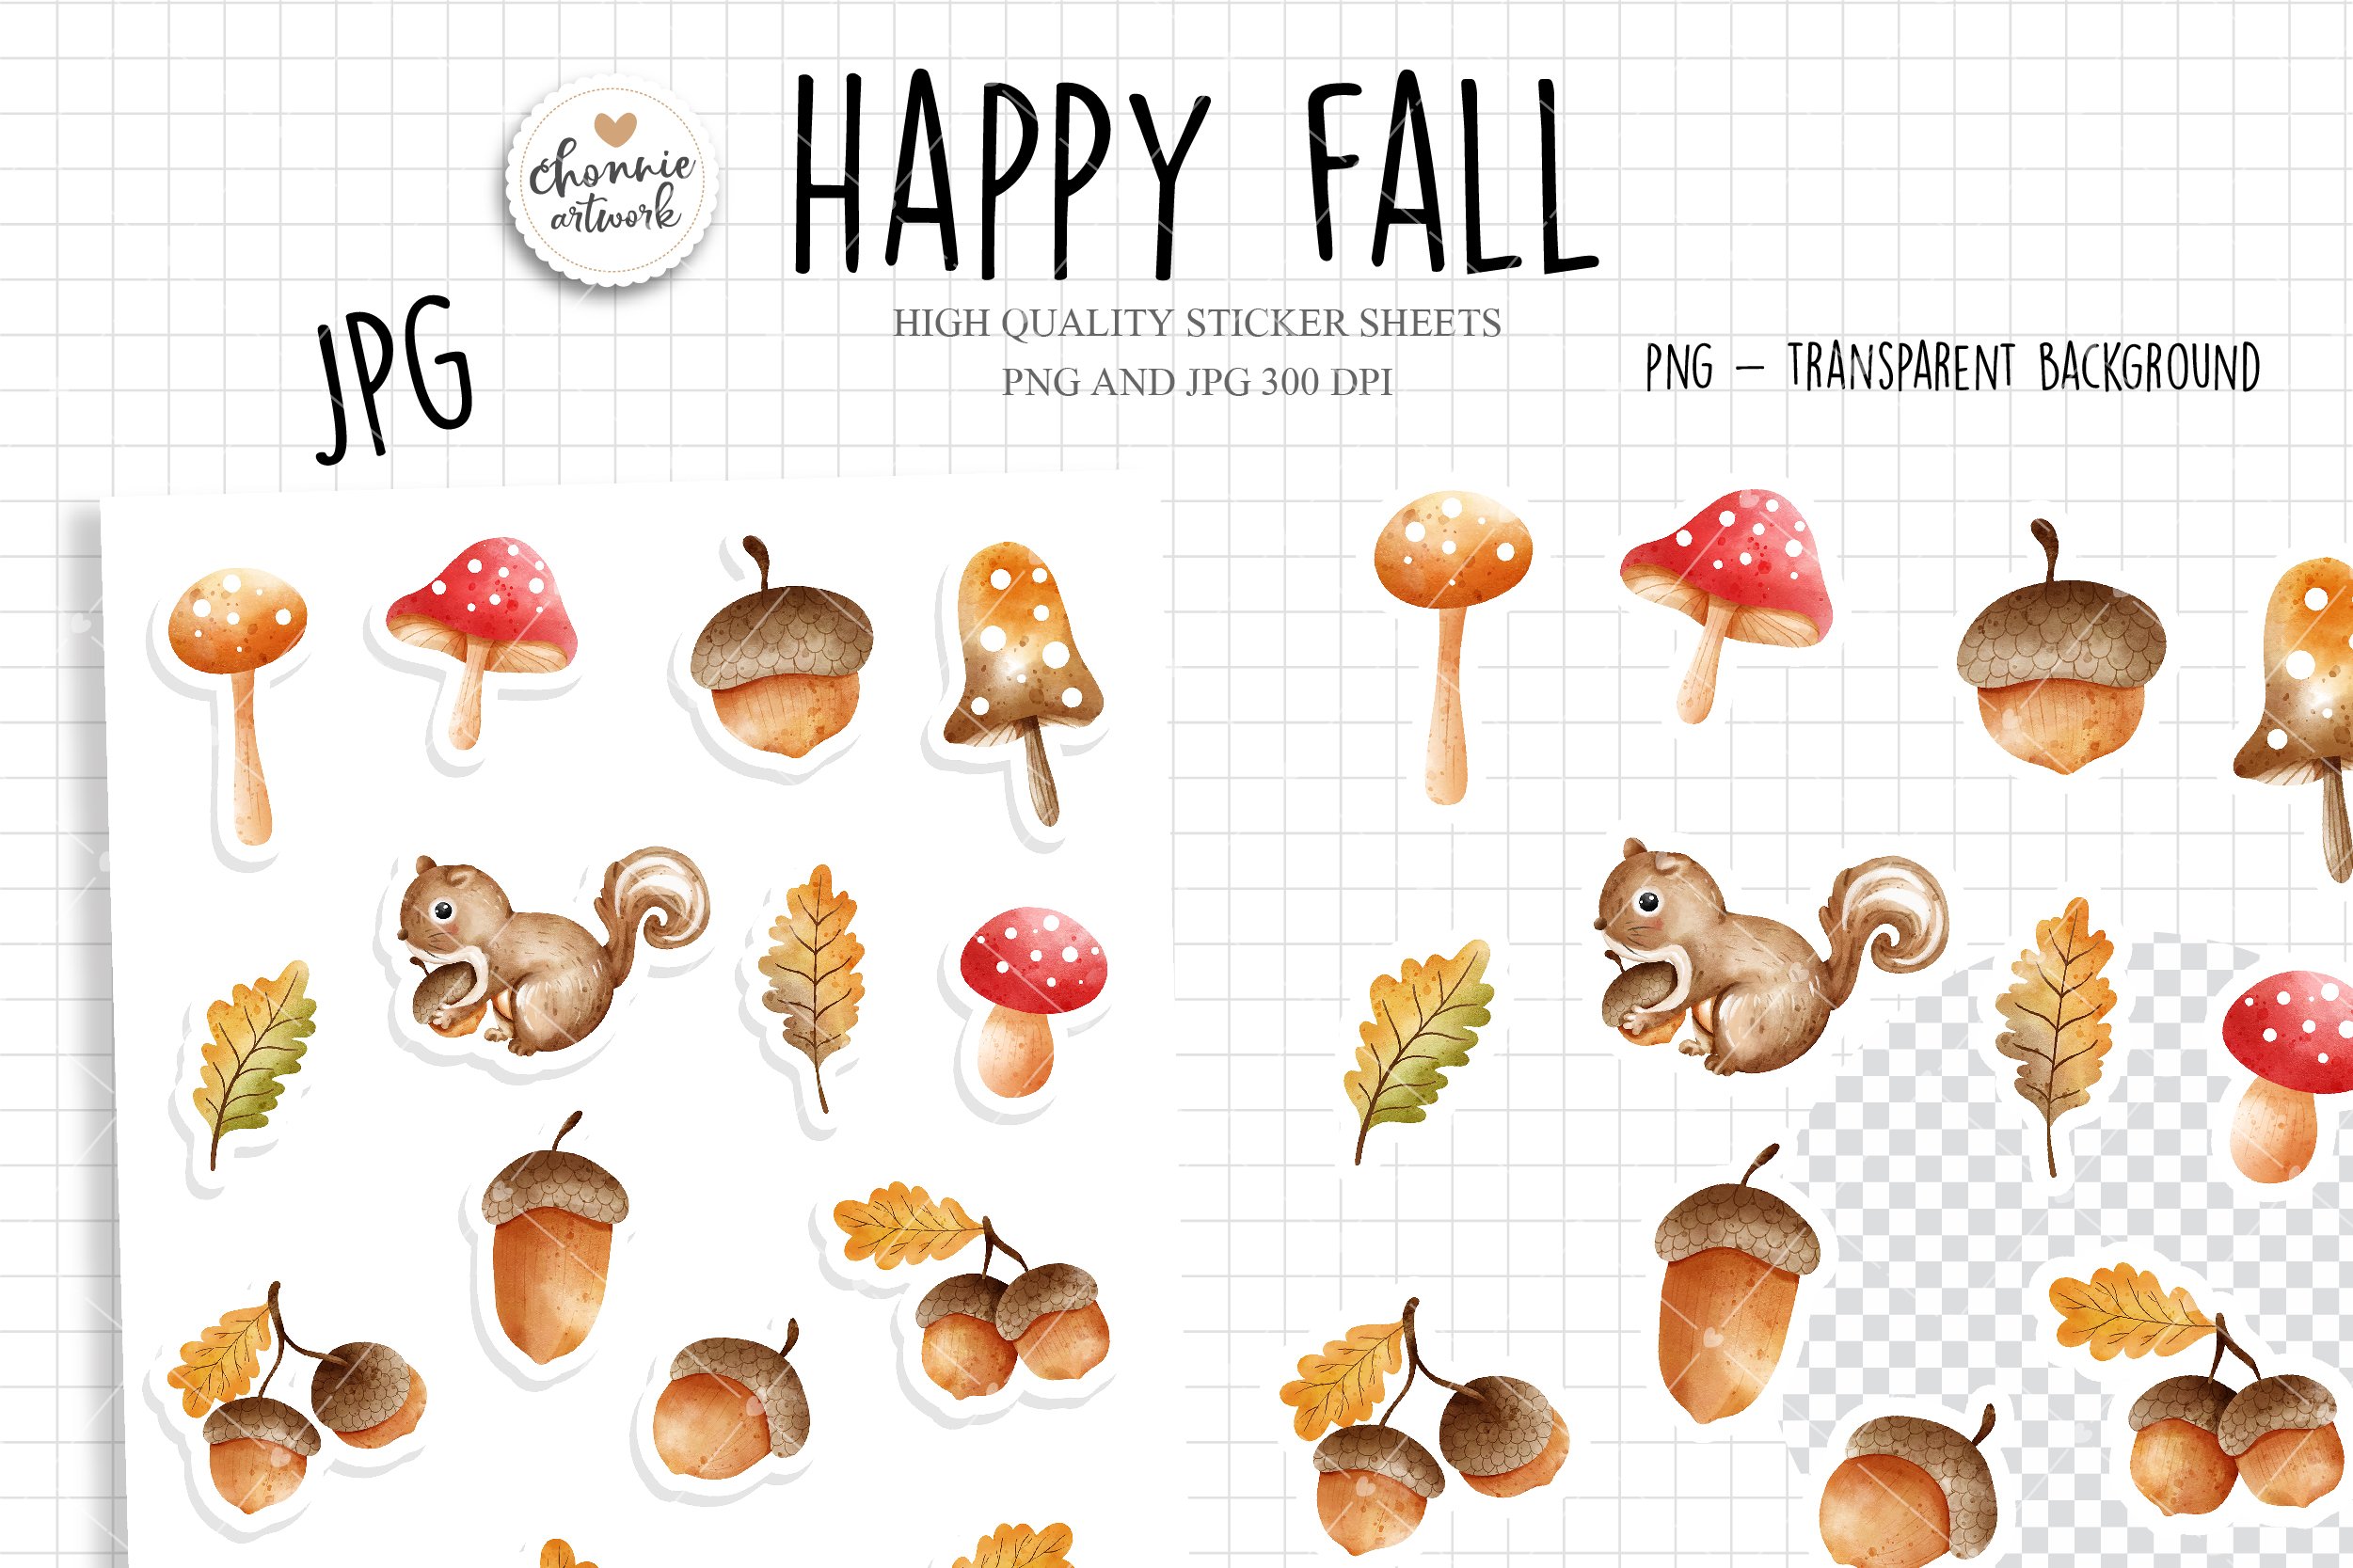 Acorn sticker sheets, happy fall preview image.